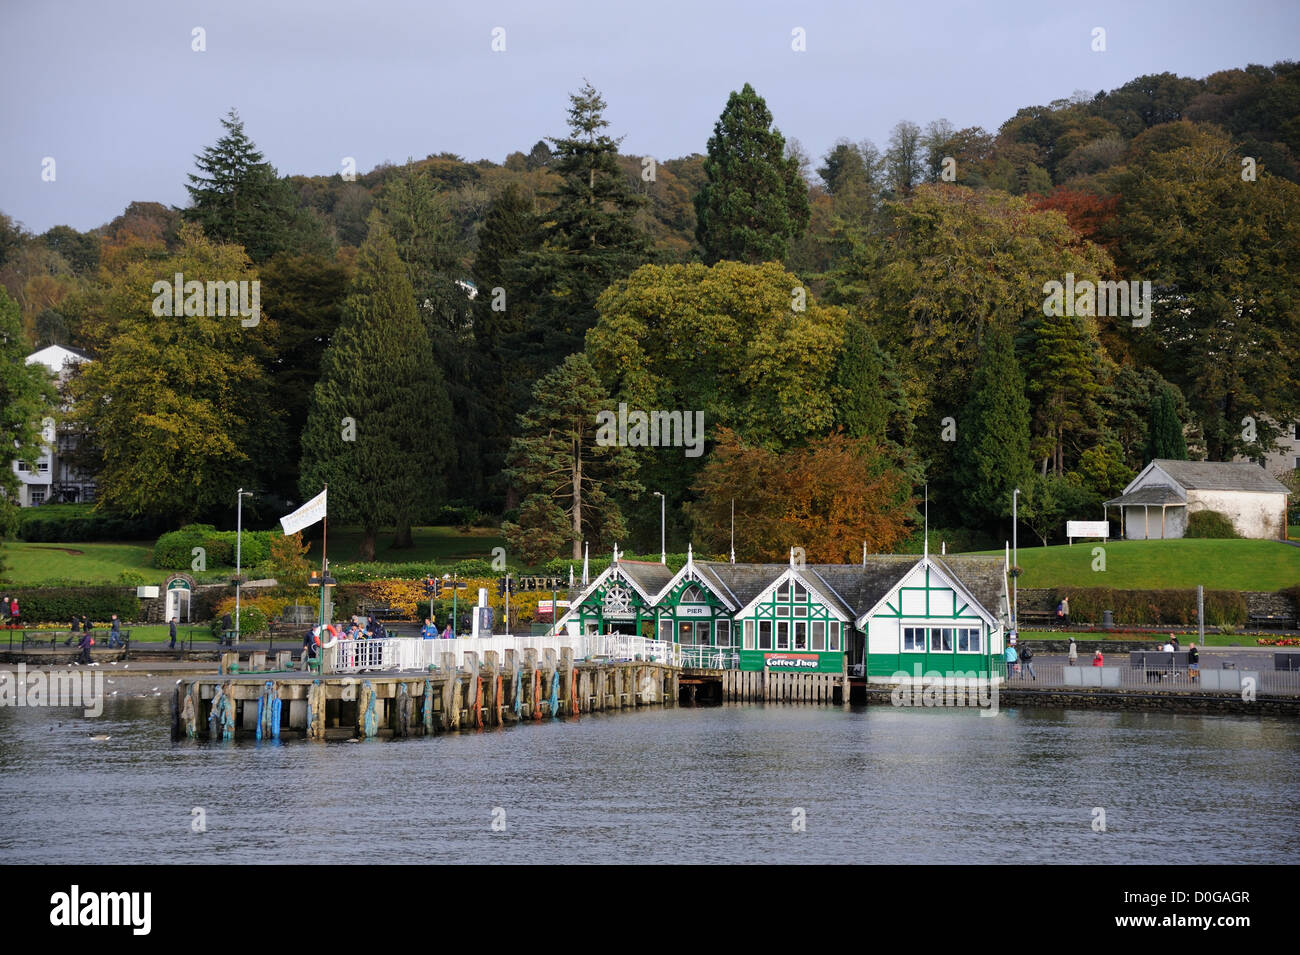 Lake Windermere, the largest natural lake in England, Cumbria, North West England. Stock Photo